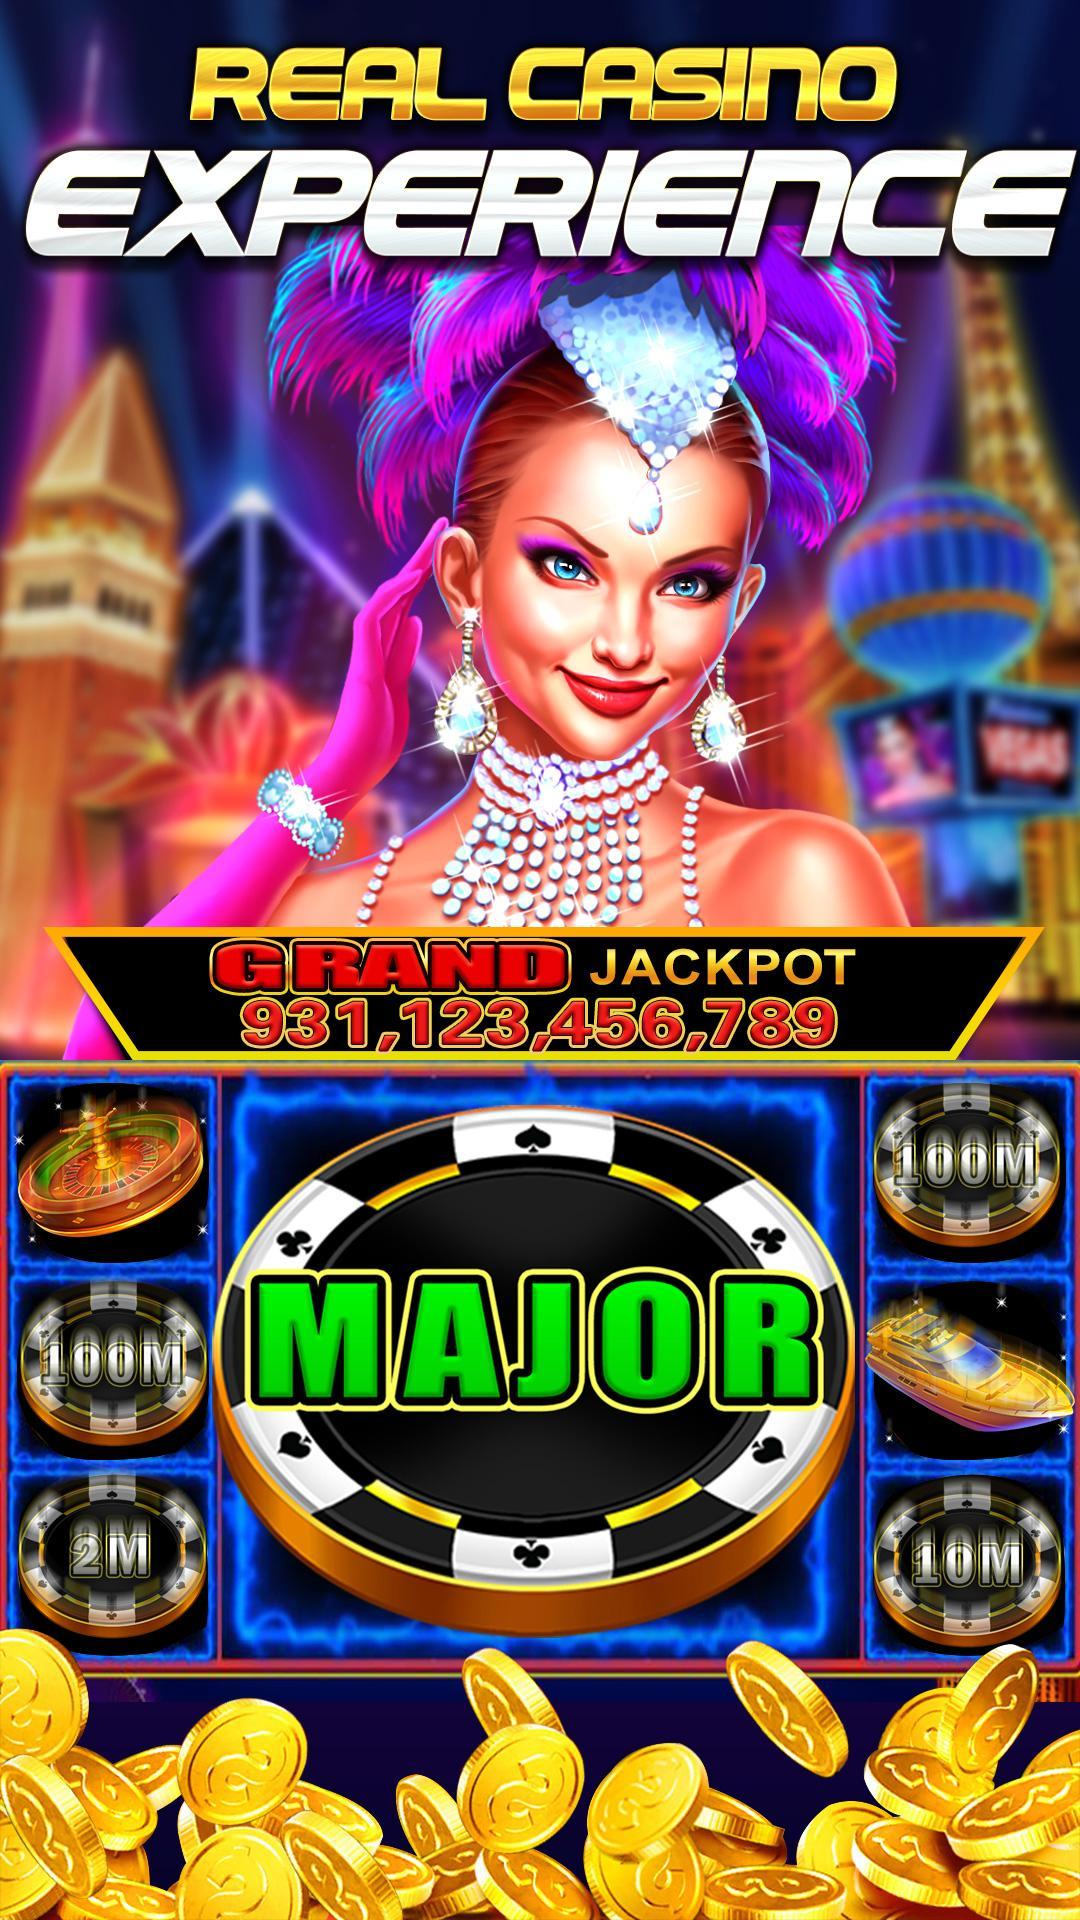 Epic Jackpot Slots - Free Vegas Casino Games for Android - APK Download